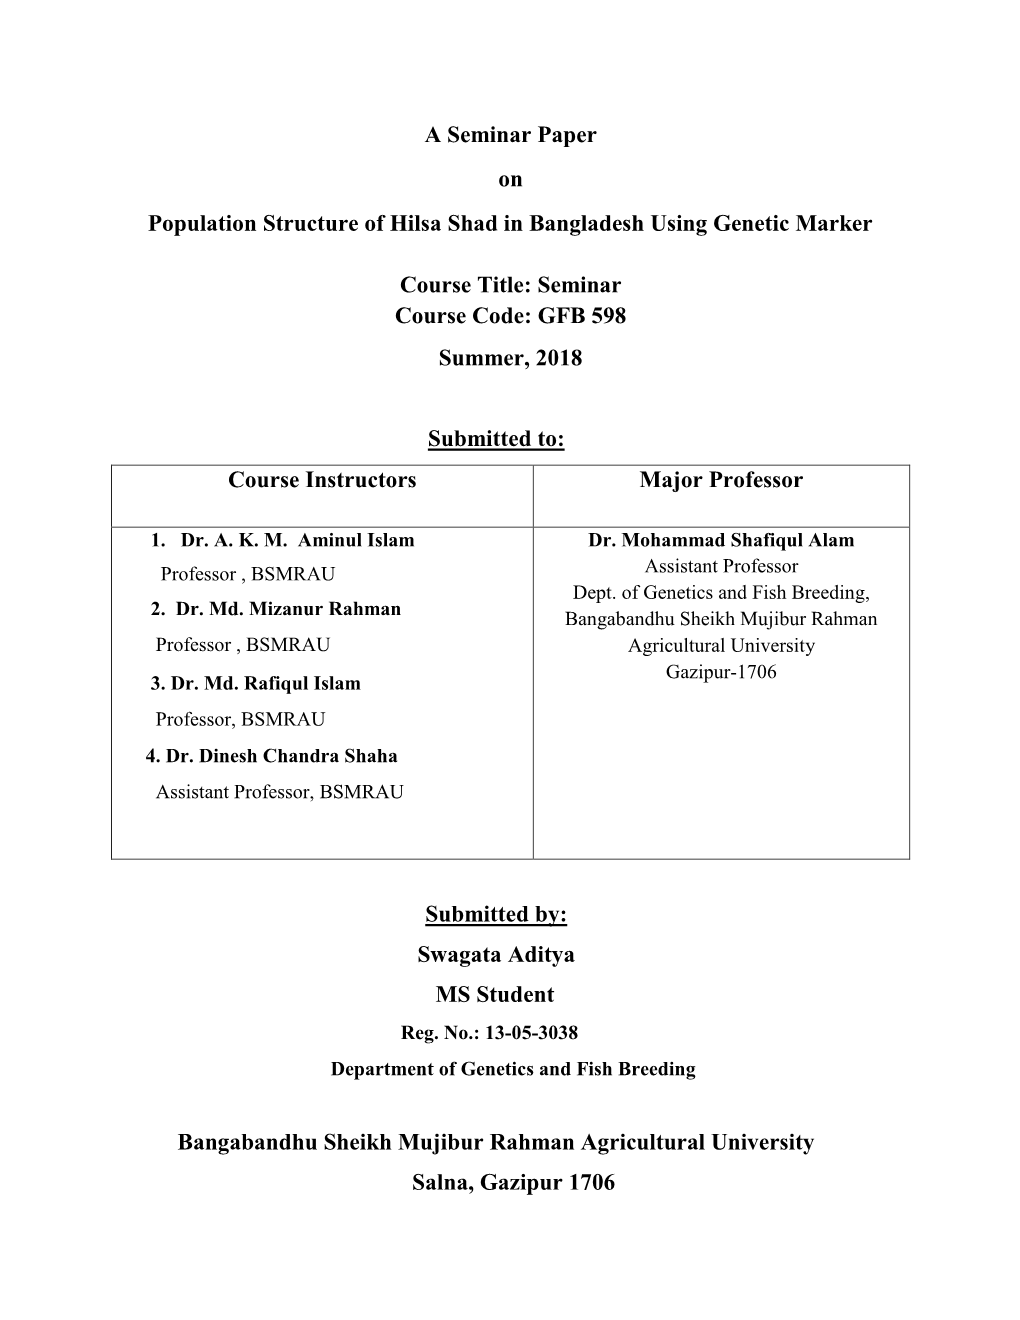 A Seminar Paper on Population Structure of Hilsa Shad in Bangladesh Using Genetic Marker